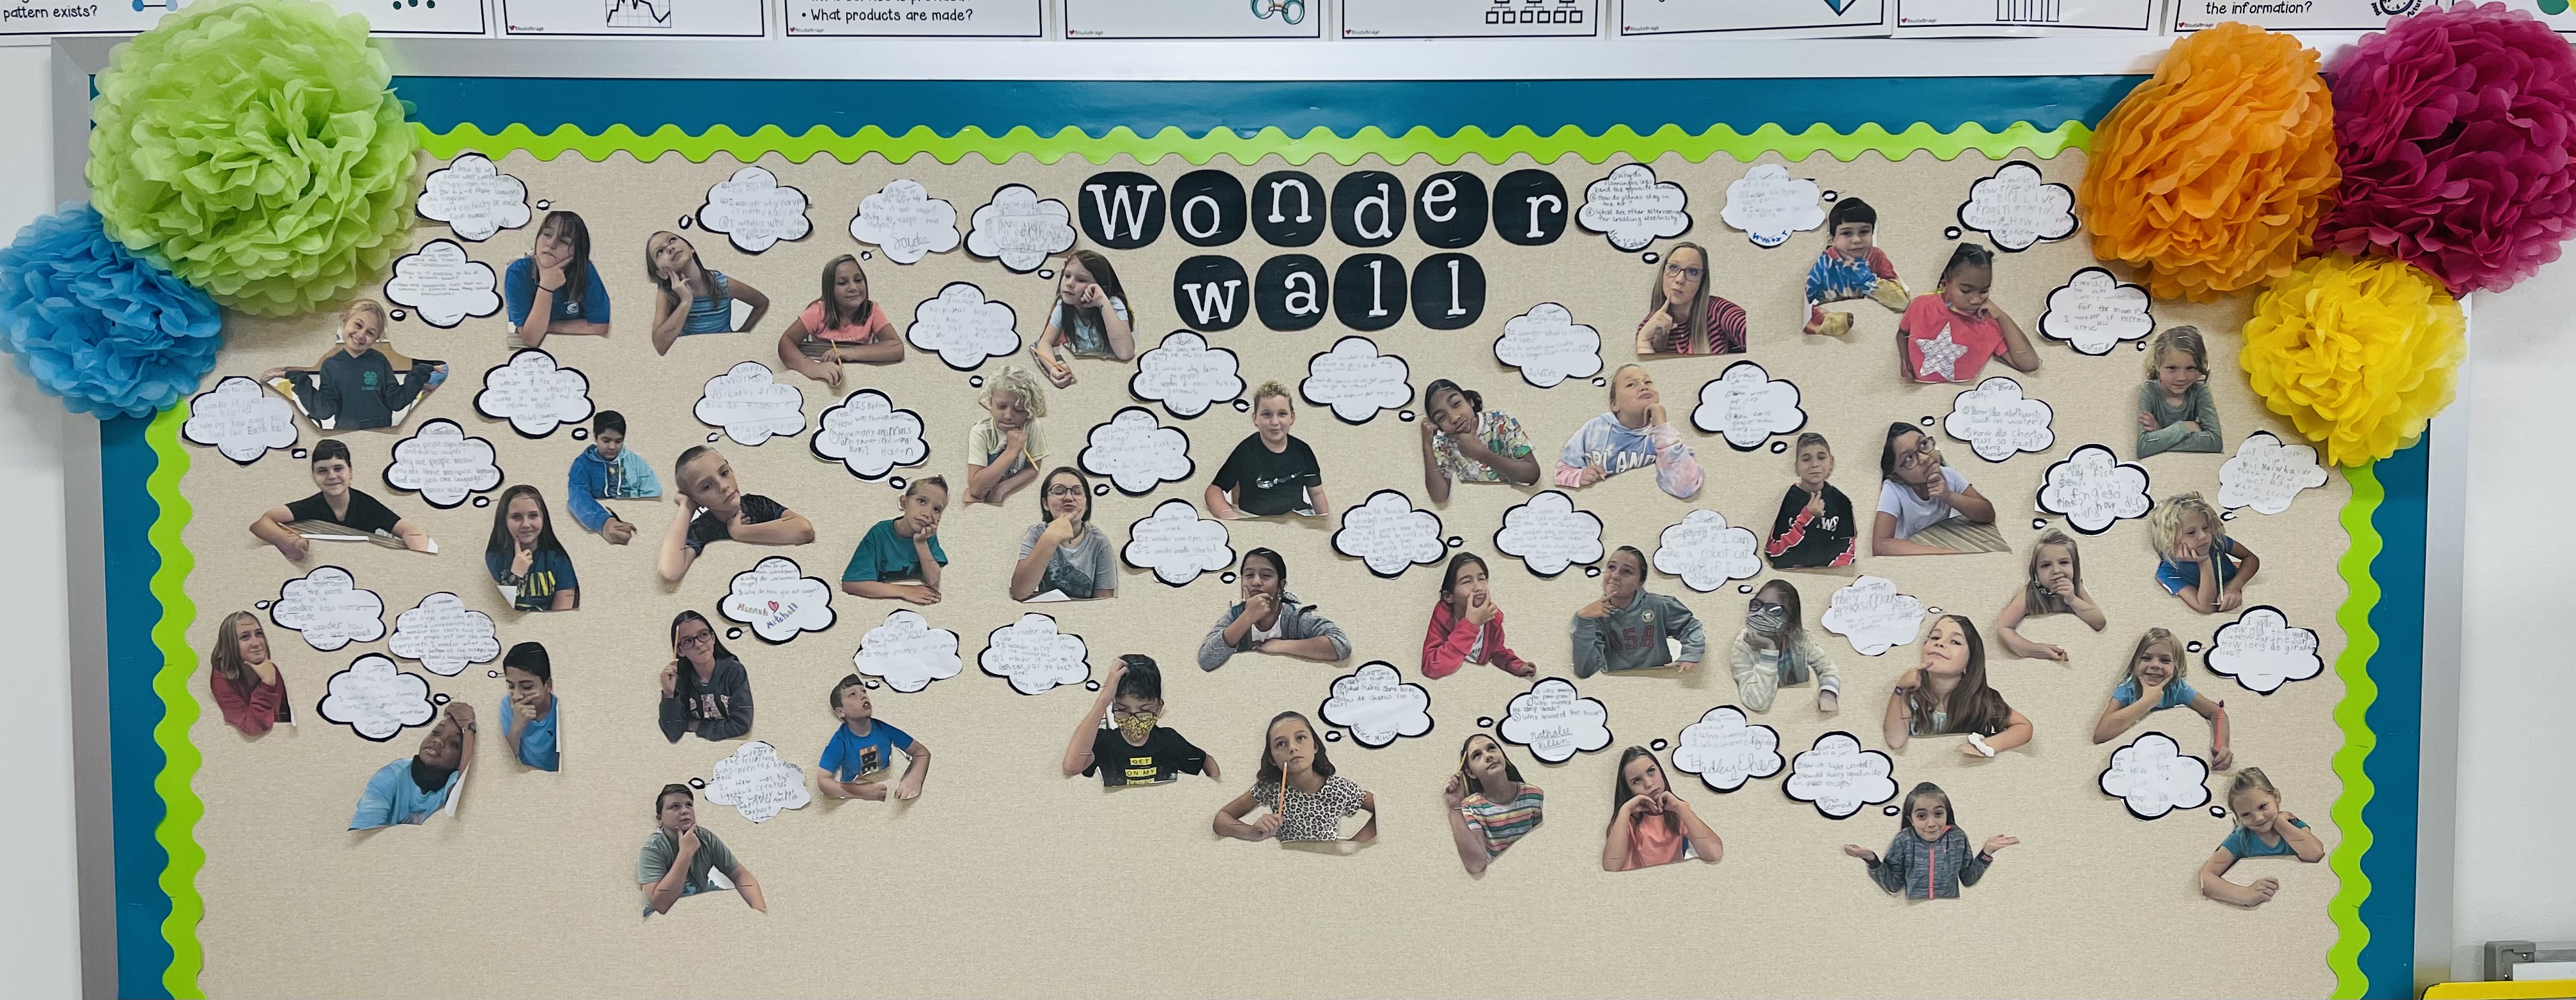 Wonder Wall - What do you wonder about??